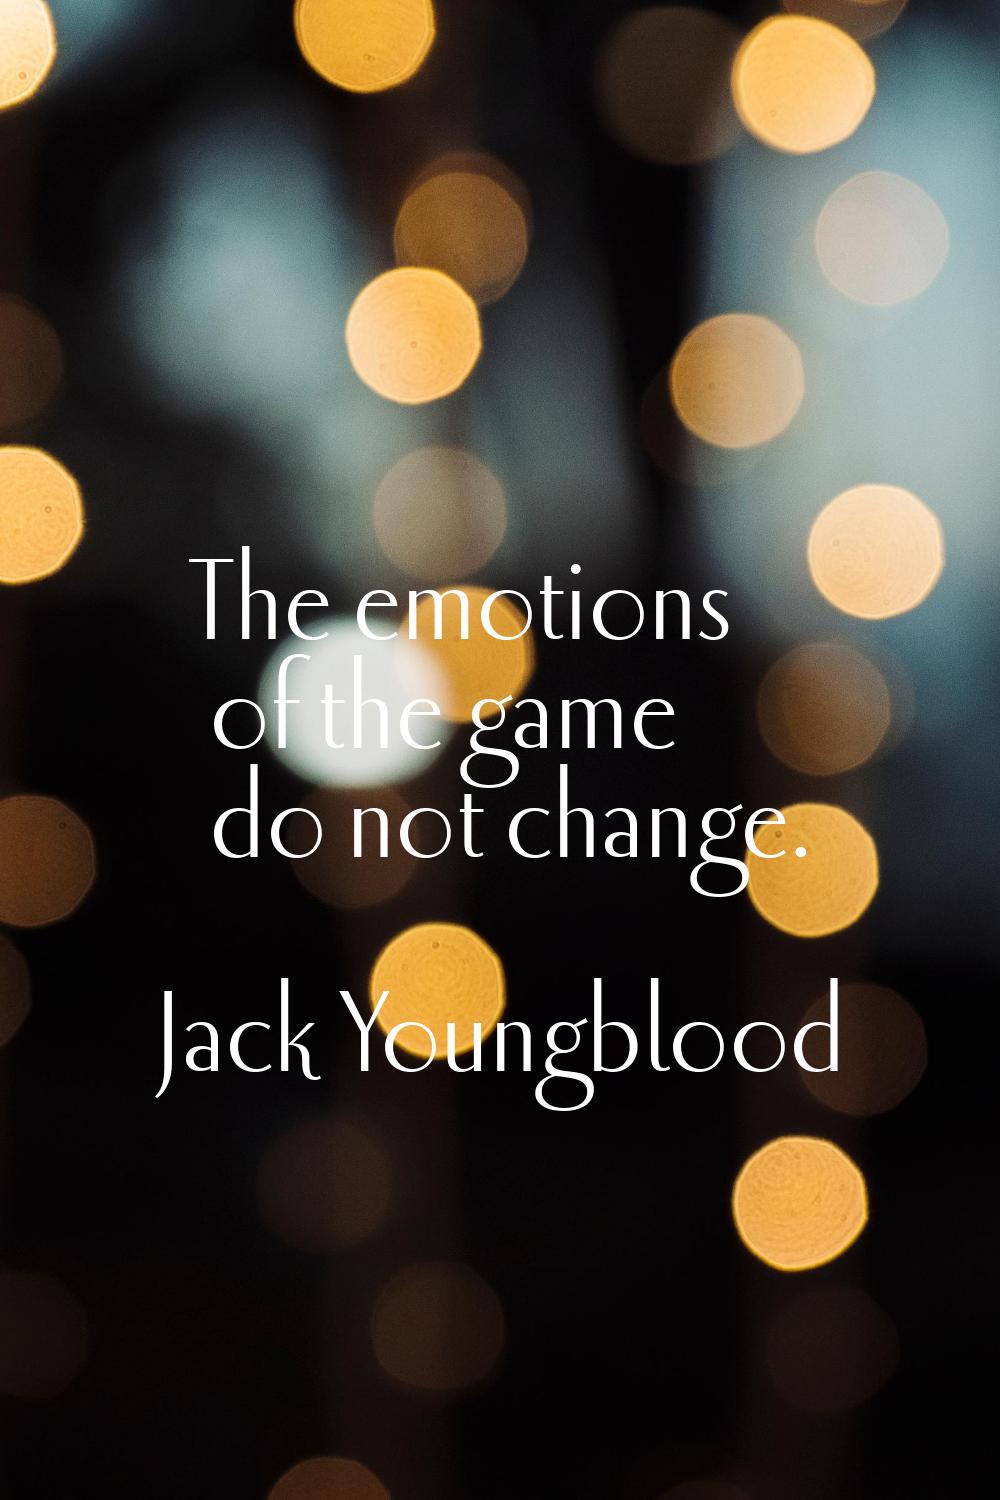 The emotions of the game do not change.